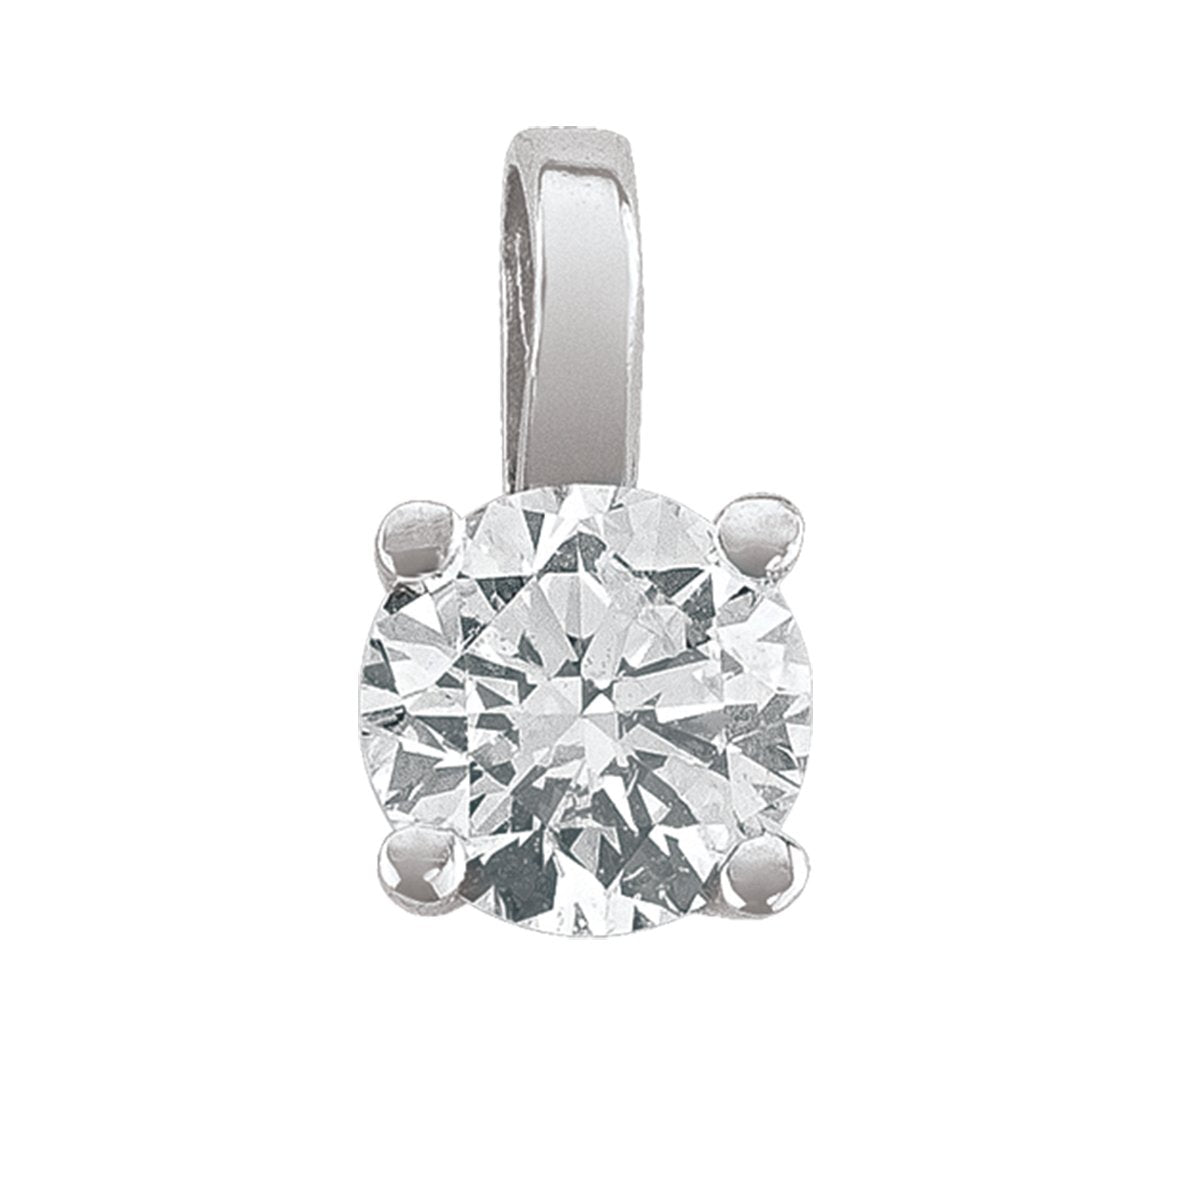 DIAMOND 4-CLAW SOLITAIRE PENDANTS (AVAILABLE IN VARIOUS STONE SIZE).